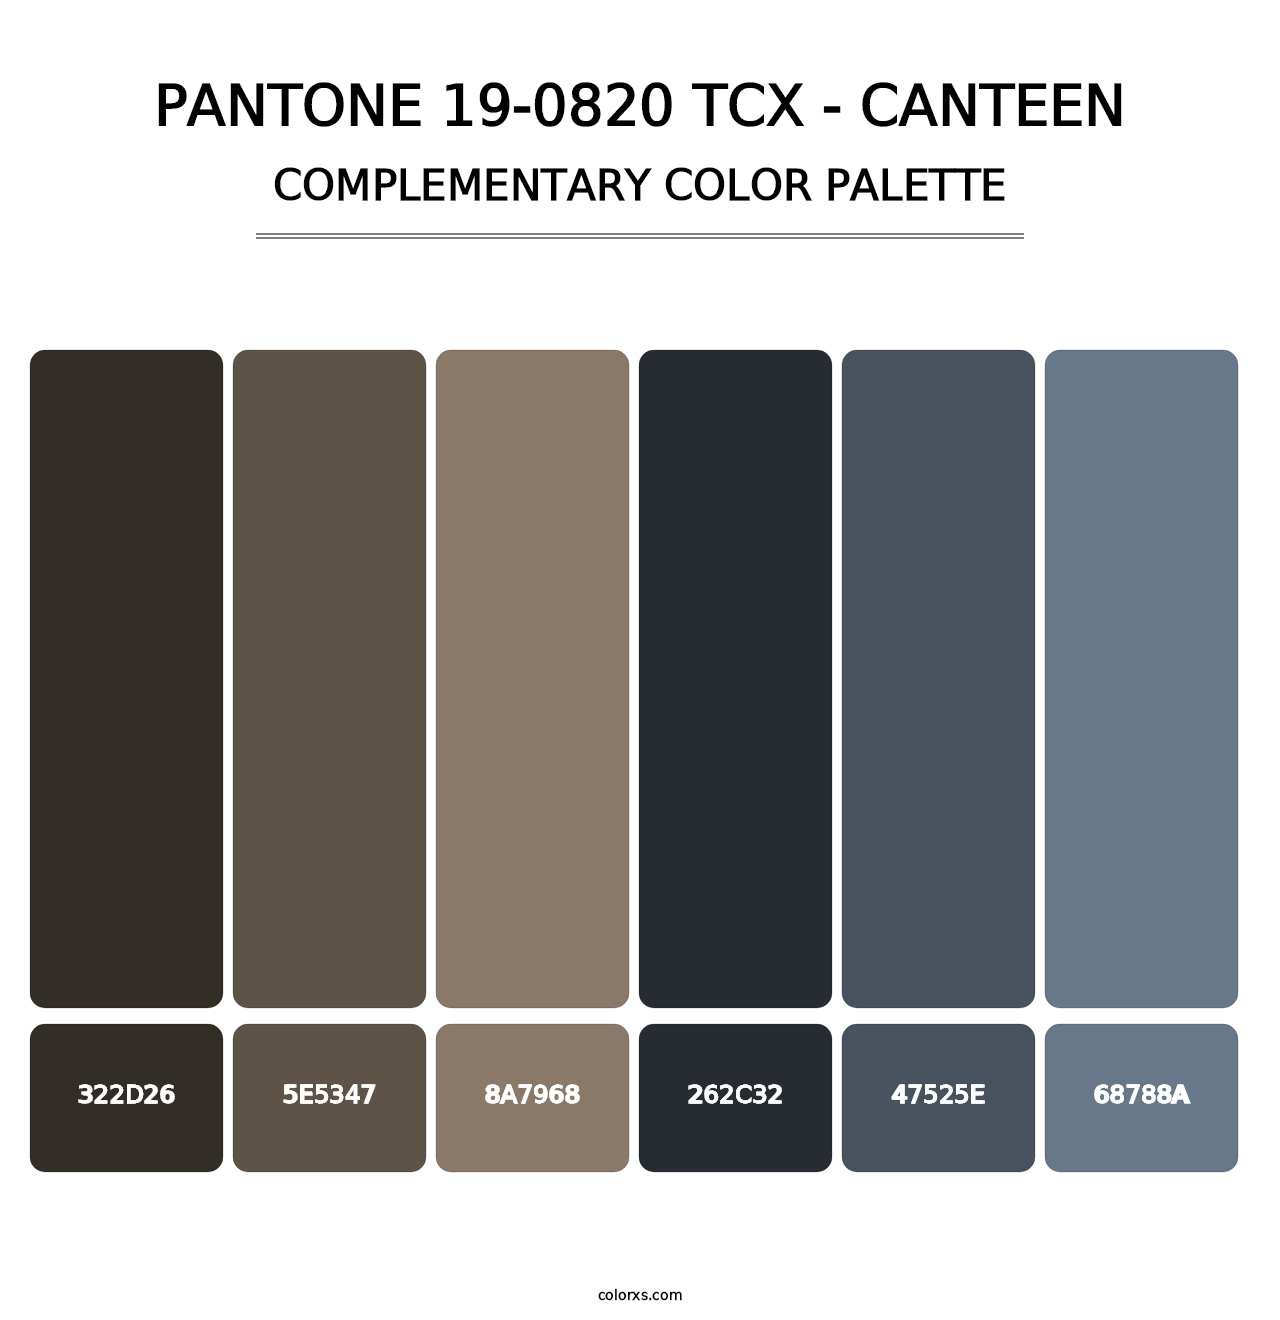 PANTONE 19-0820 TCX - Canteen - Complementary Color Palette